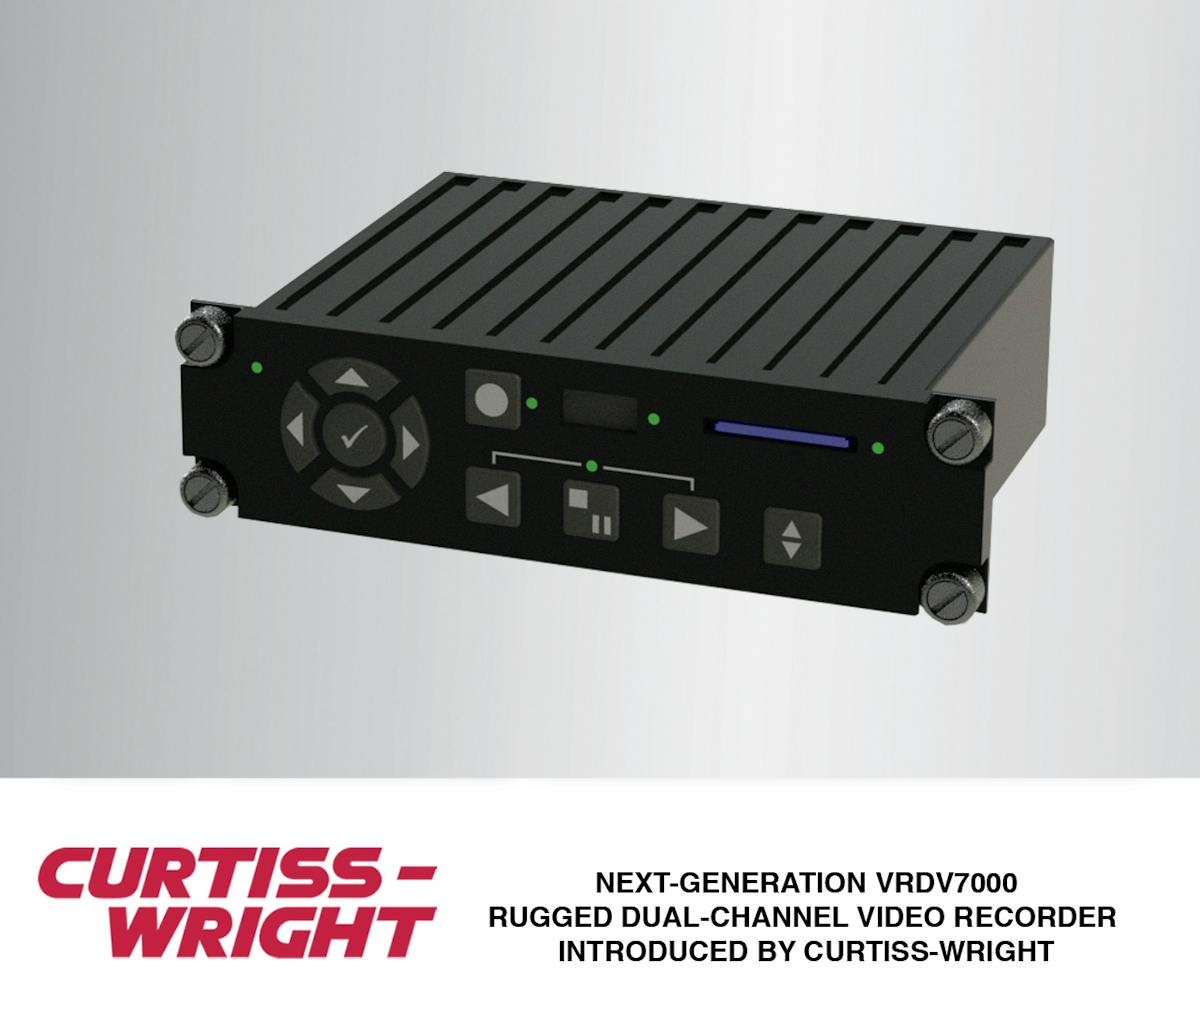 New VRDV7000 Delivers Flexible, High Density/High Quality SWaP-Optimized Dual-Channel Video Recording/Playback with Metadata Support